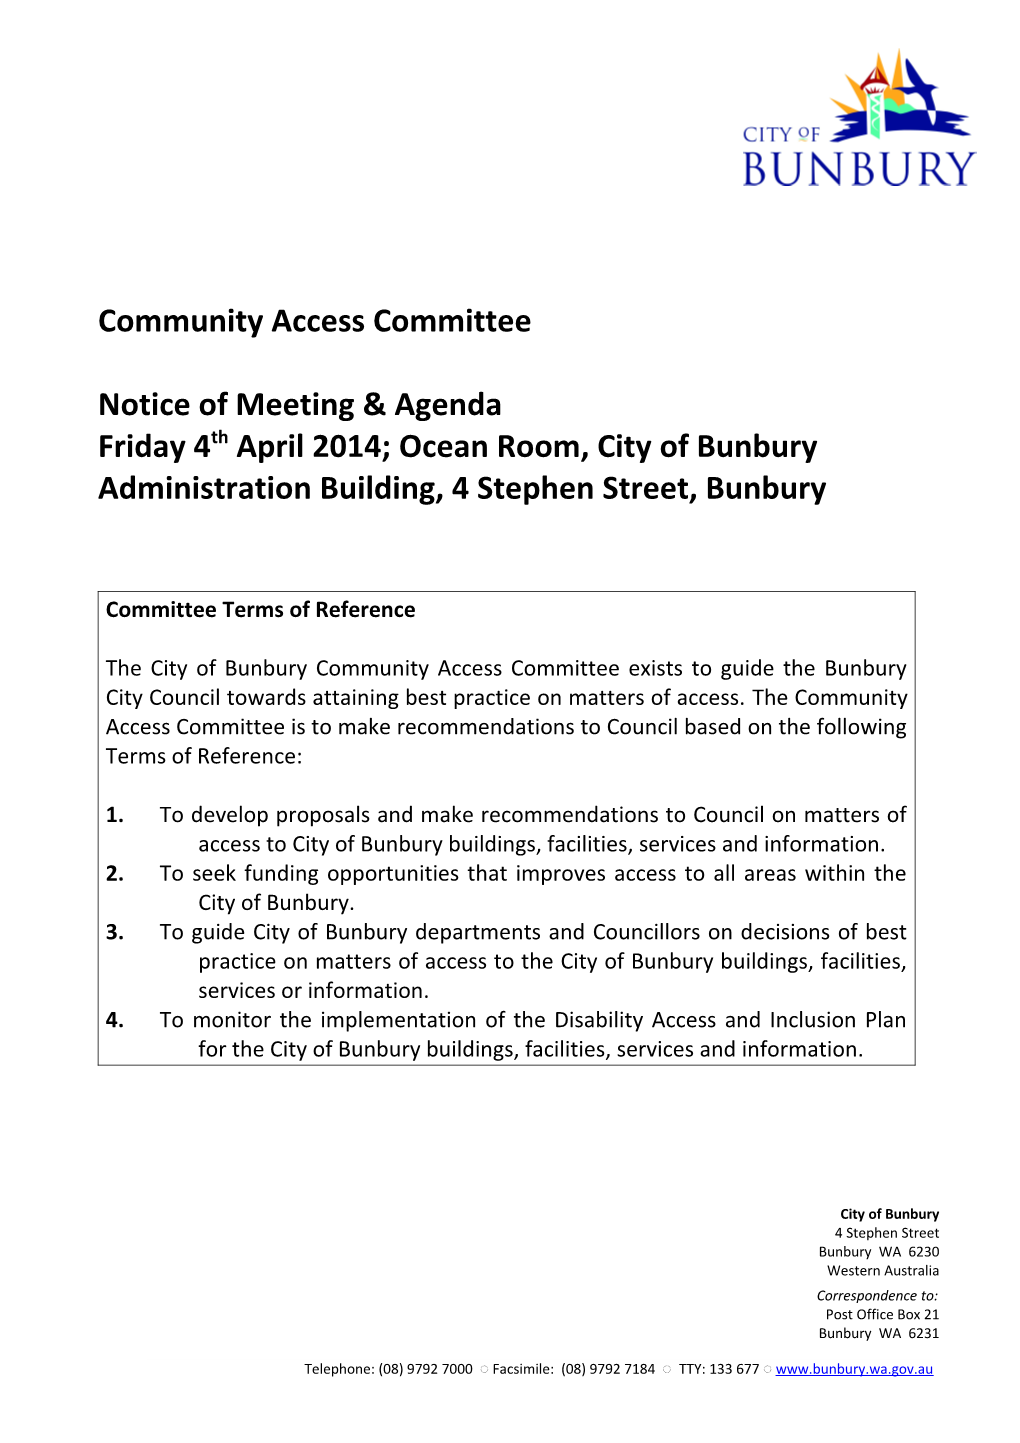 City of Bunbury Agenda - with Macros and Autotext. Use This Template to Type Your Agenda